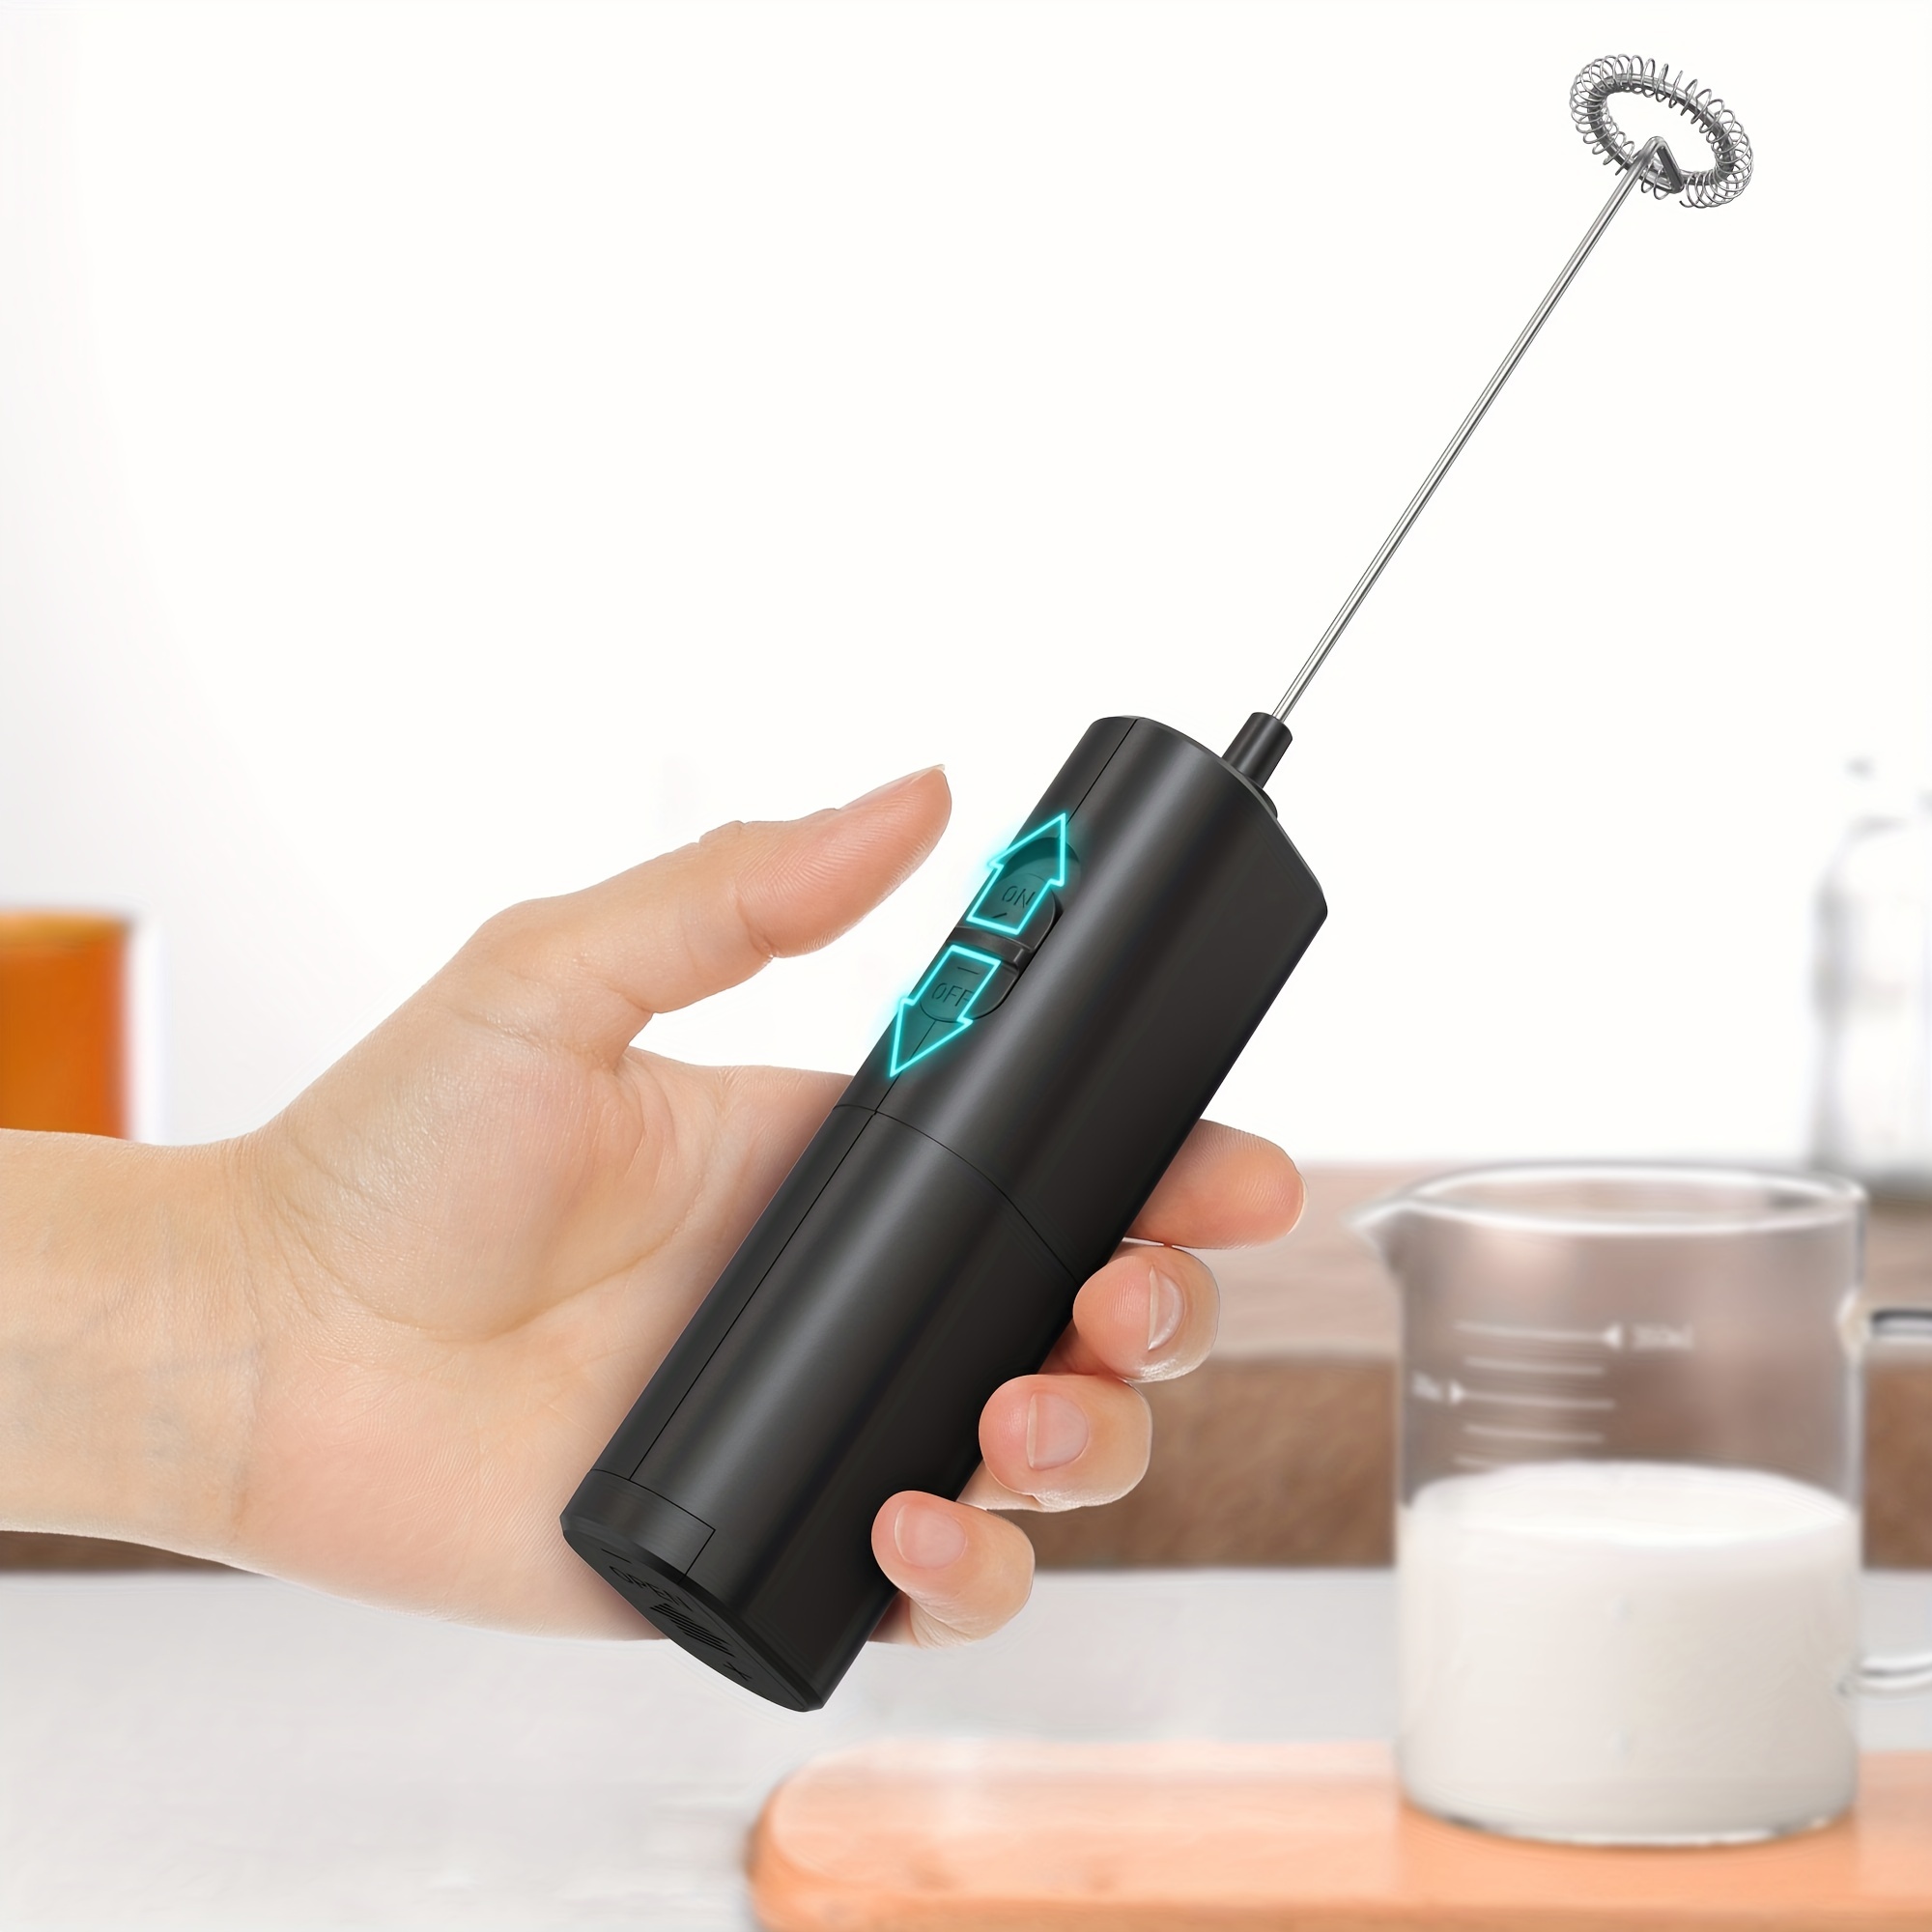 1pc Multifunctional Coffee Milk Frother Home Milk Frother Maker Blender  Handheld Egg Whisk Cream Beater Handheld Electric Frother Stainless Steel  Foam Maker Perfect For Latte, Coffee, Cappuccino, Chocolate Milk Frother